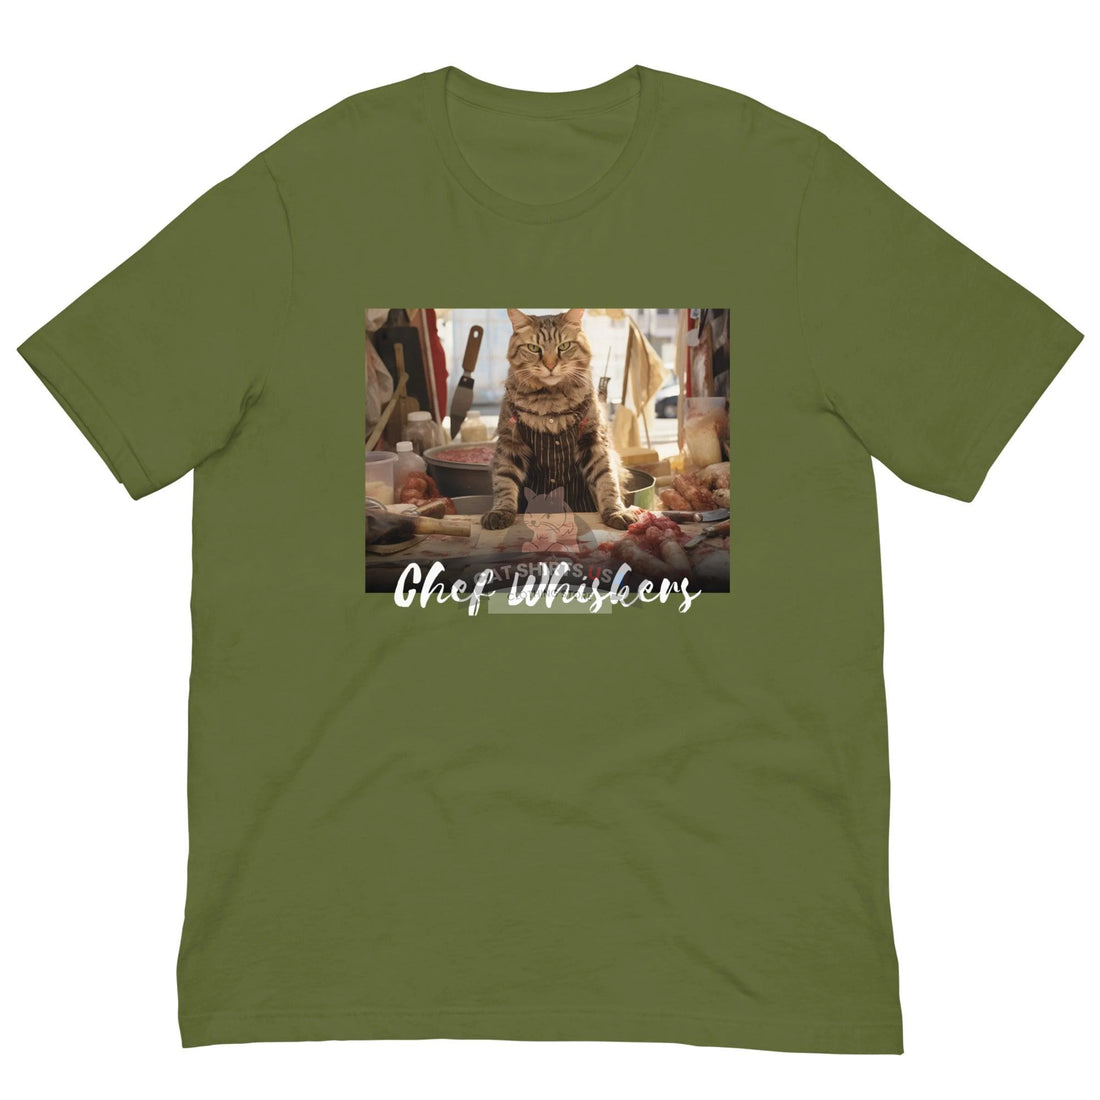 Chef Whiskers Cat Shirt - Cat Shirts USA